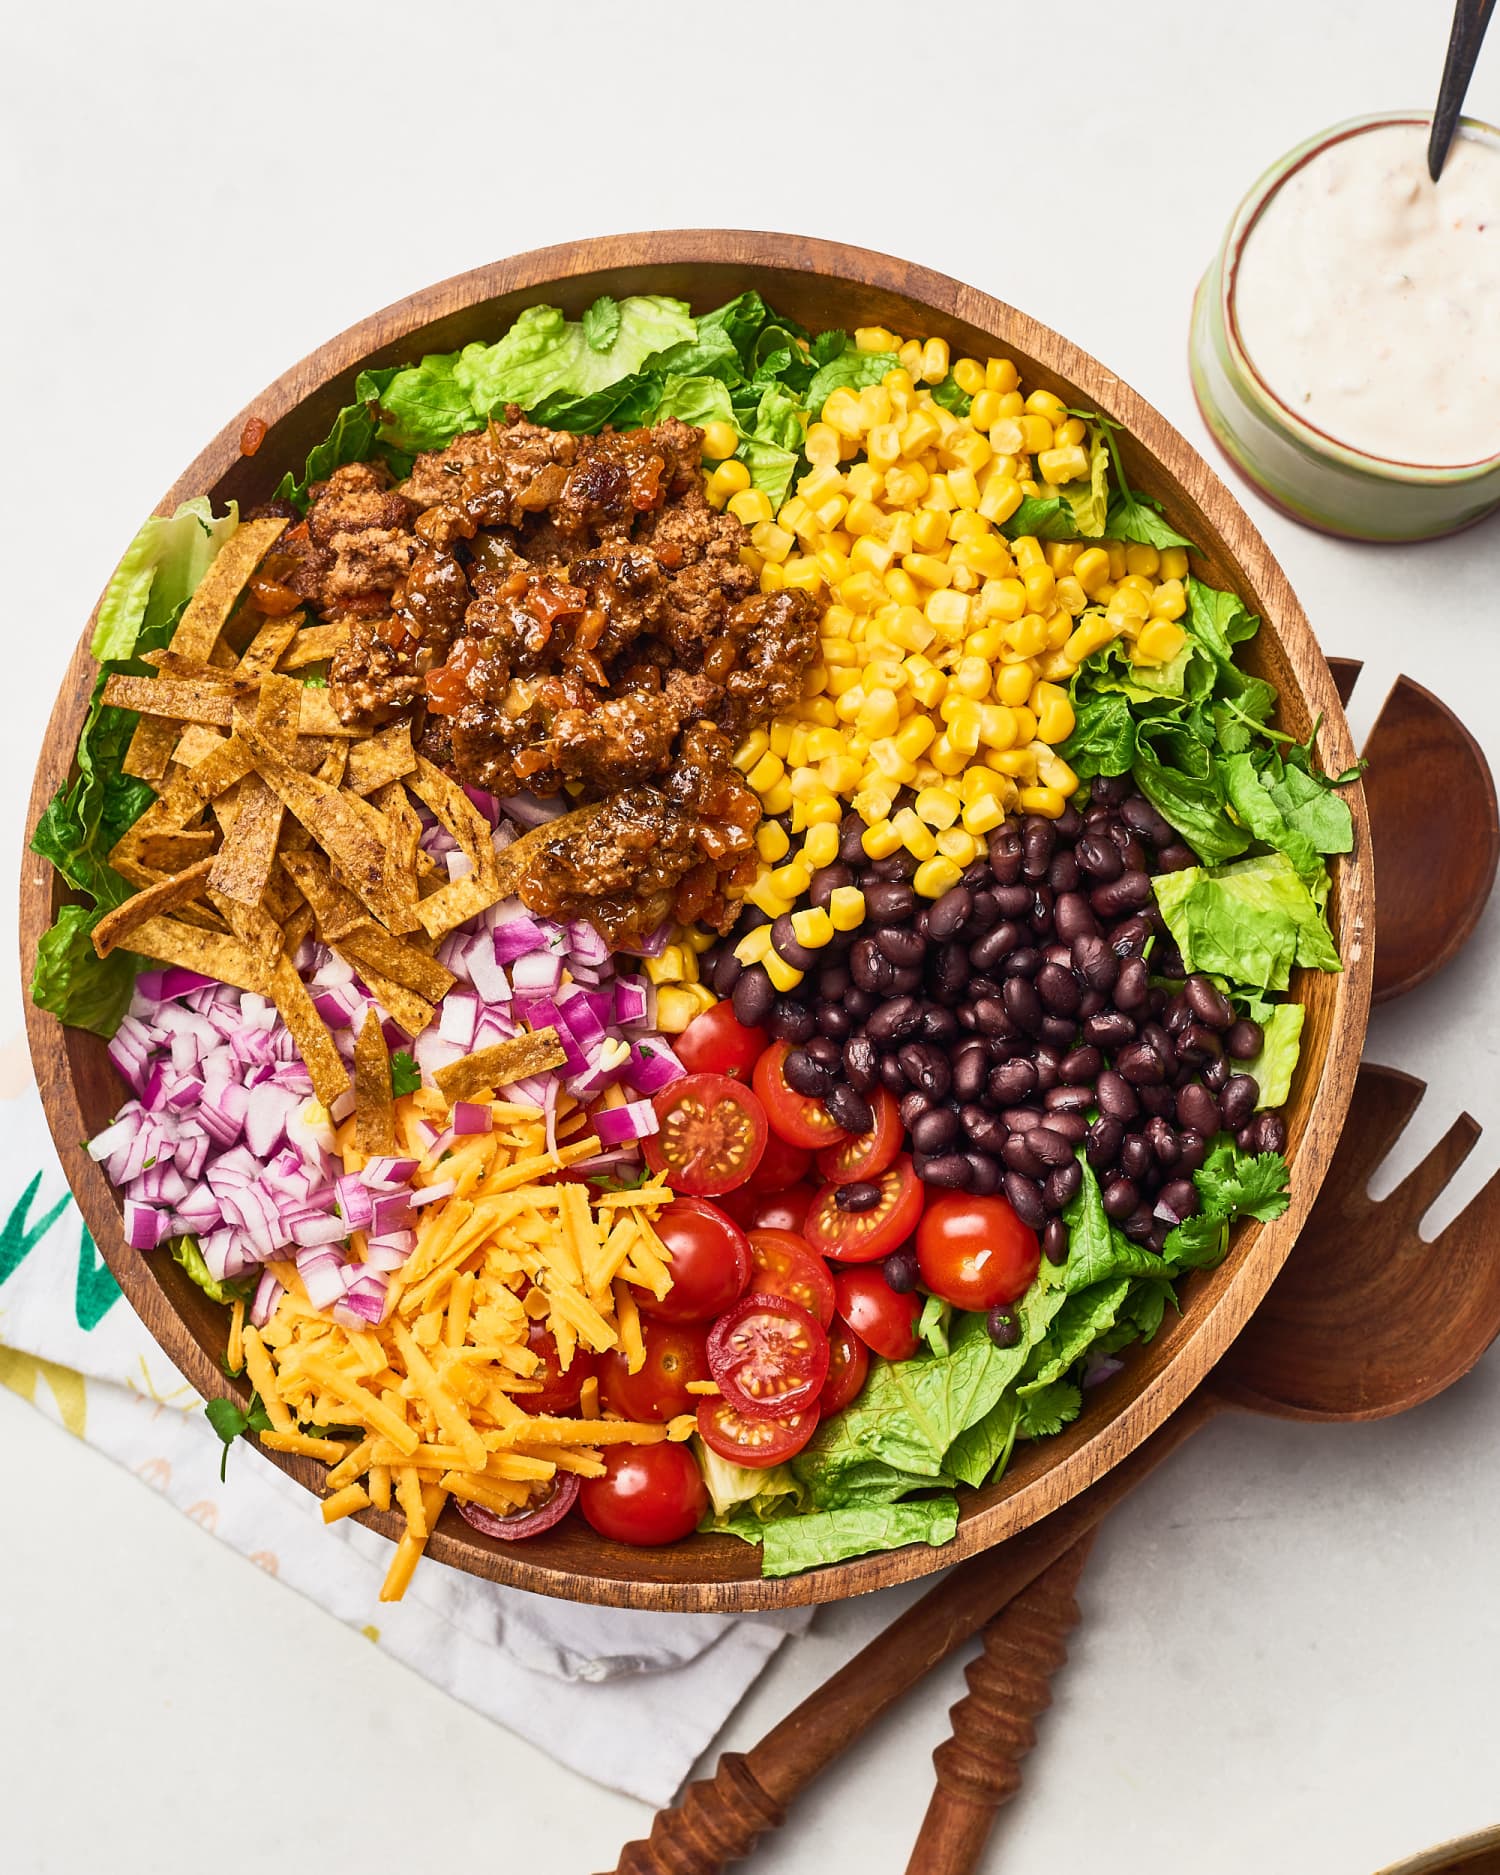 How To Make the Best Restaurant-Quality Taco Salad at Home | Kitchn